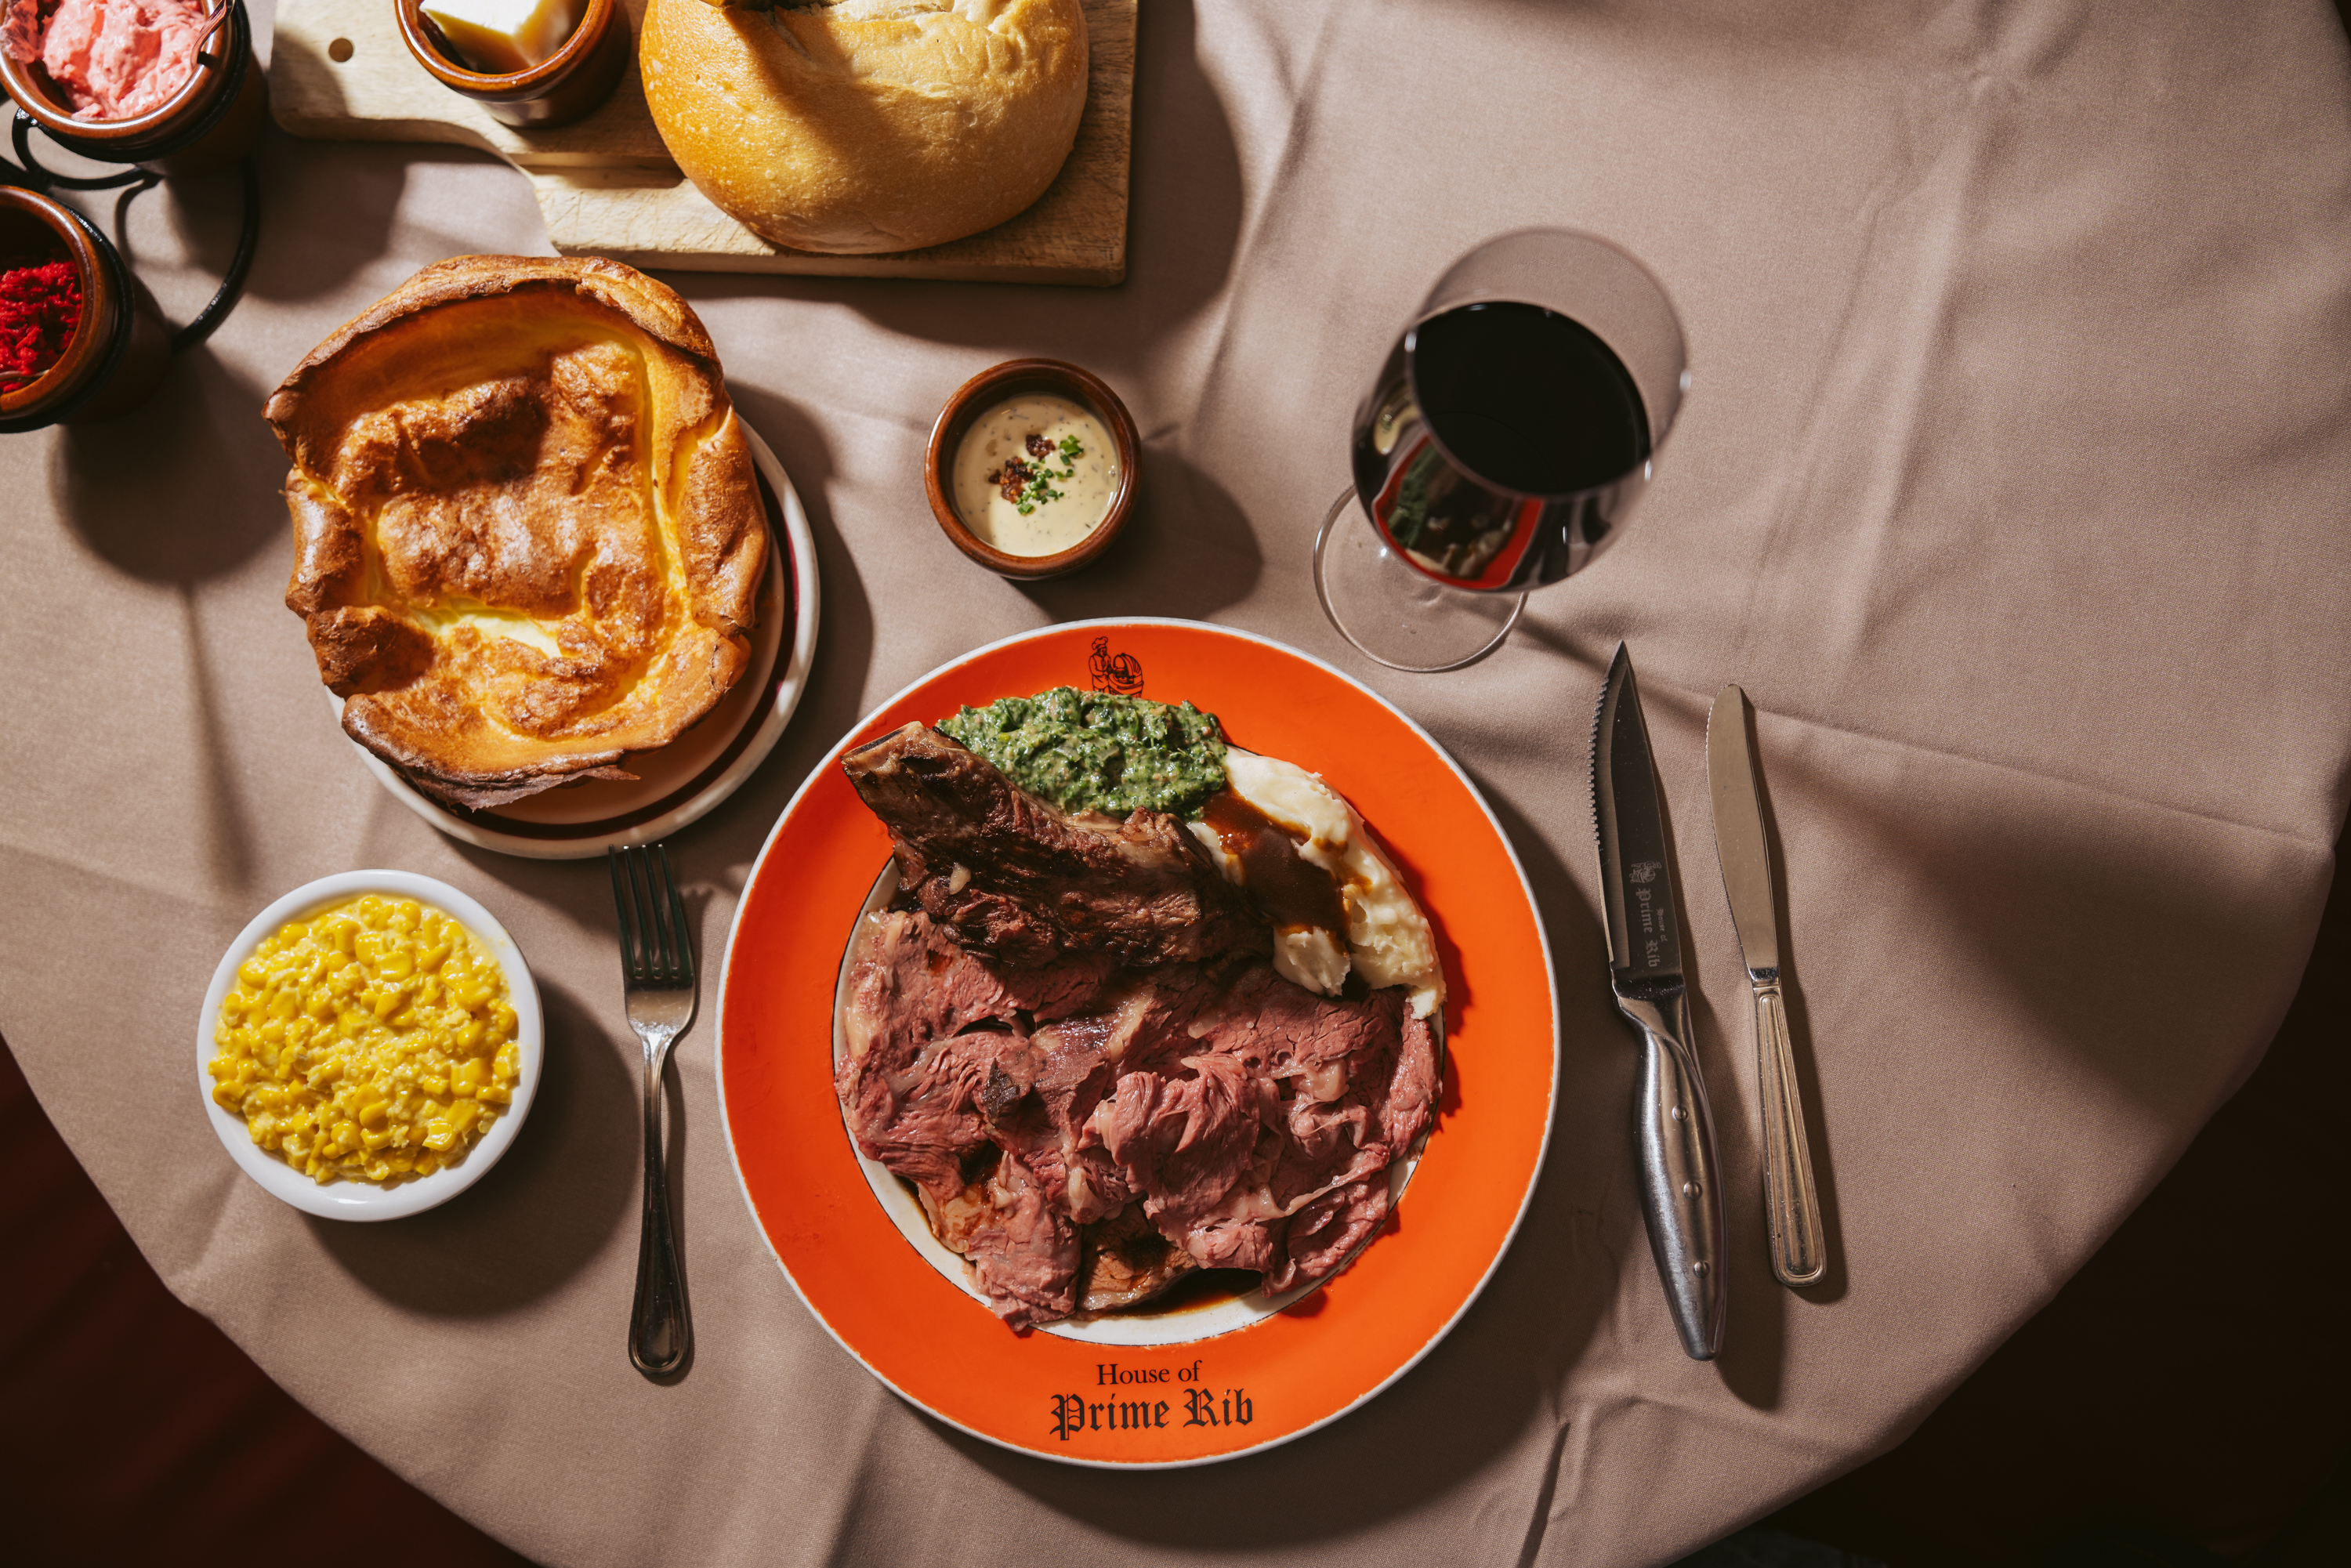 A prime rib on a plate next to a fork, wine glass, and other items of food.